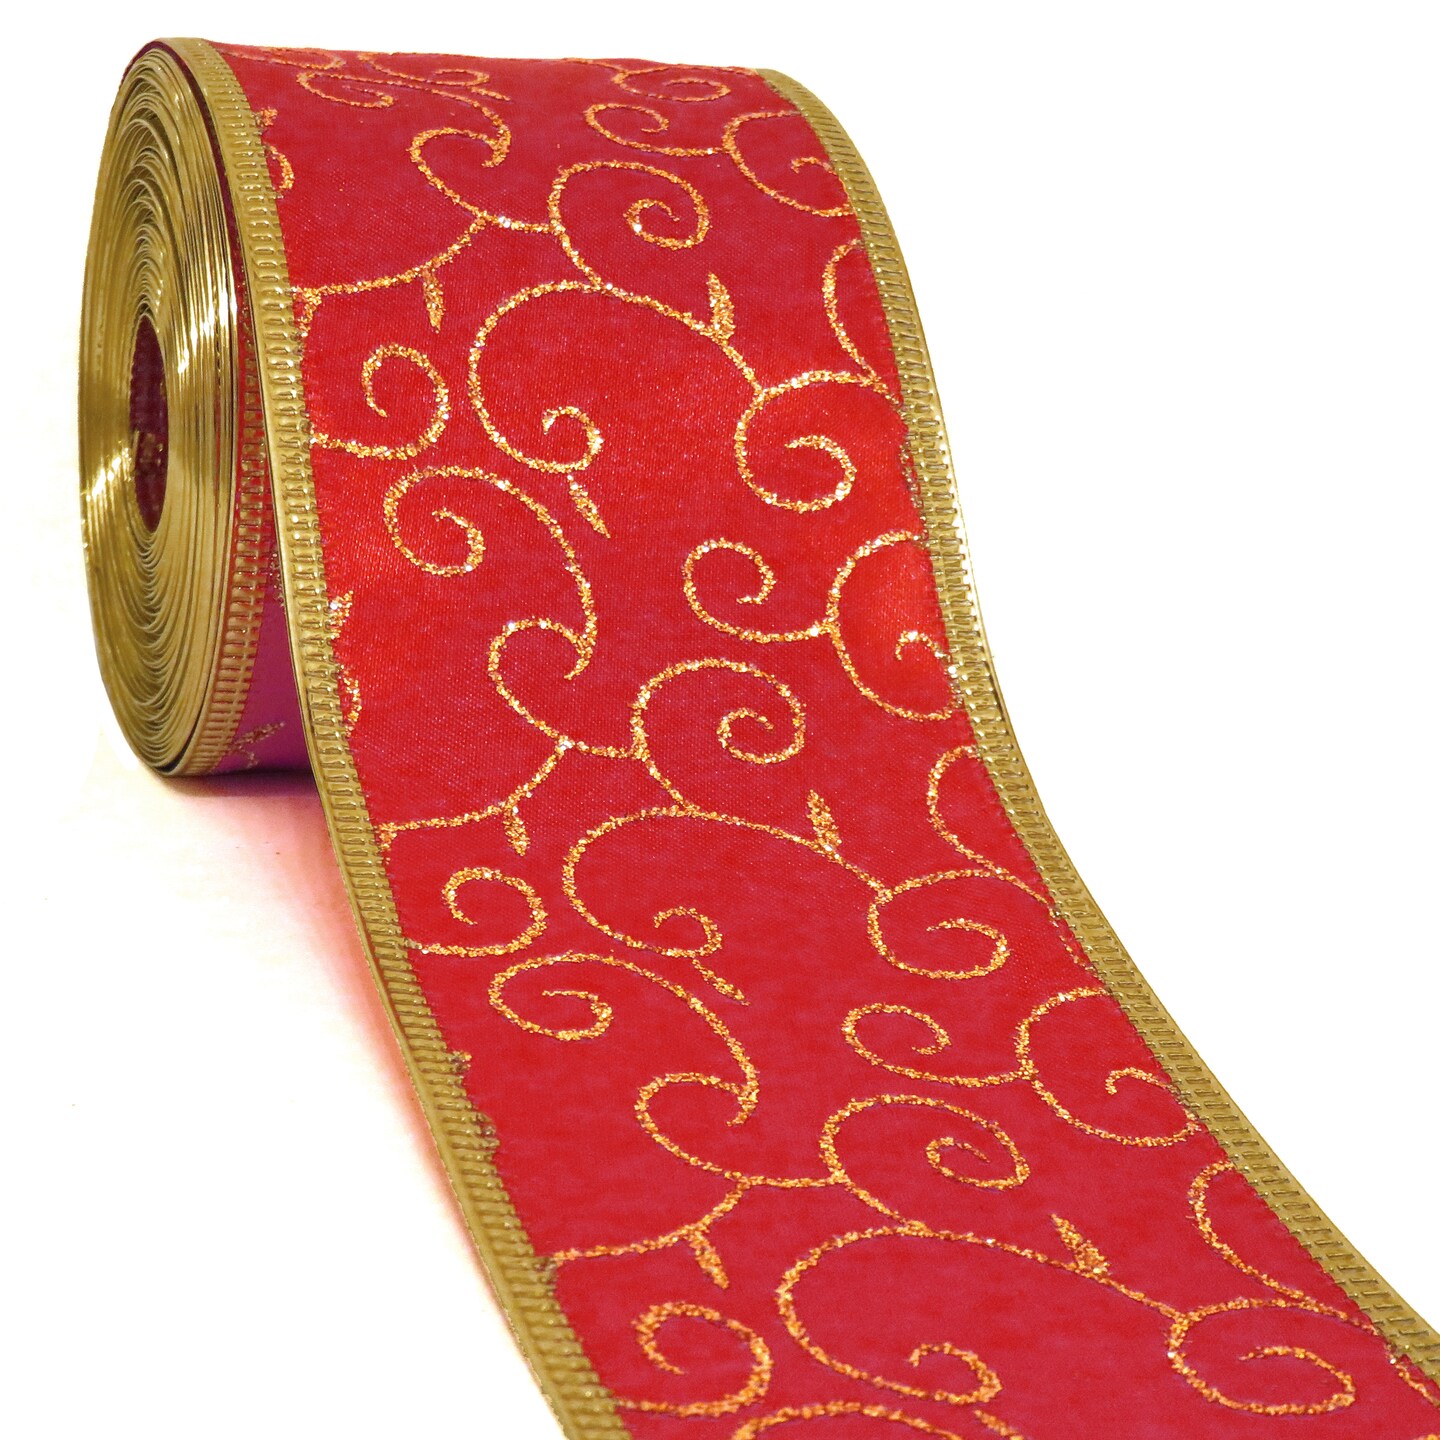 WR 63-5032 2.5” x 10 yard Holiday Velvet Christmas Purple wired edge ribbons